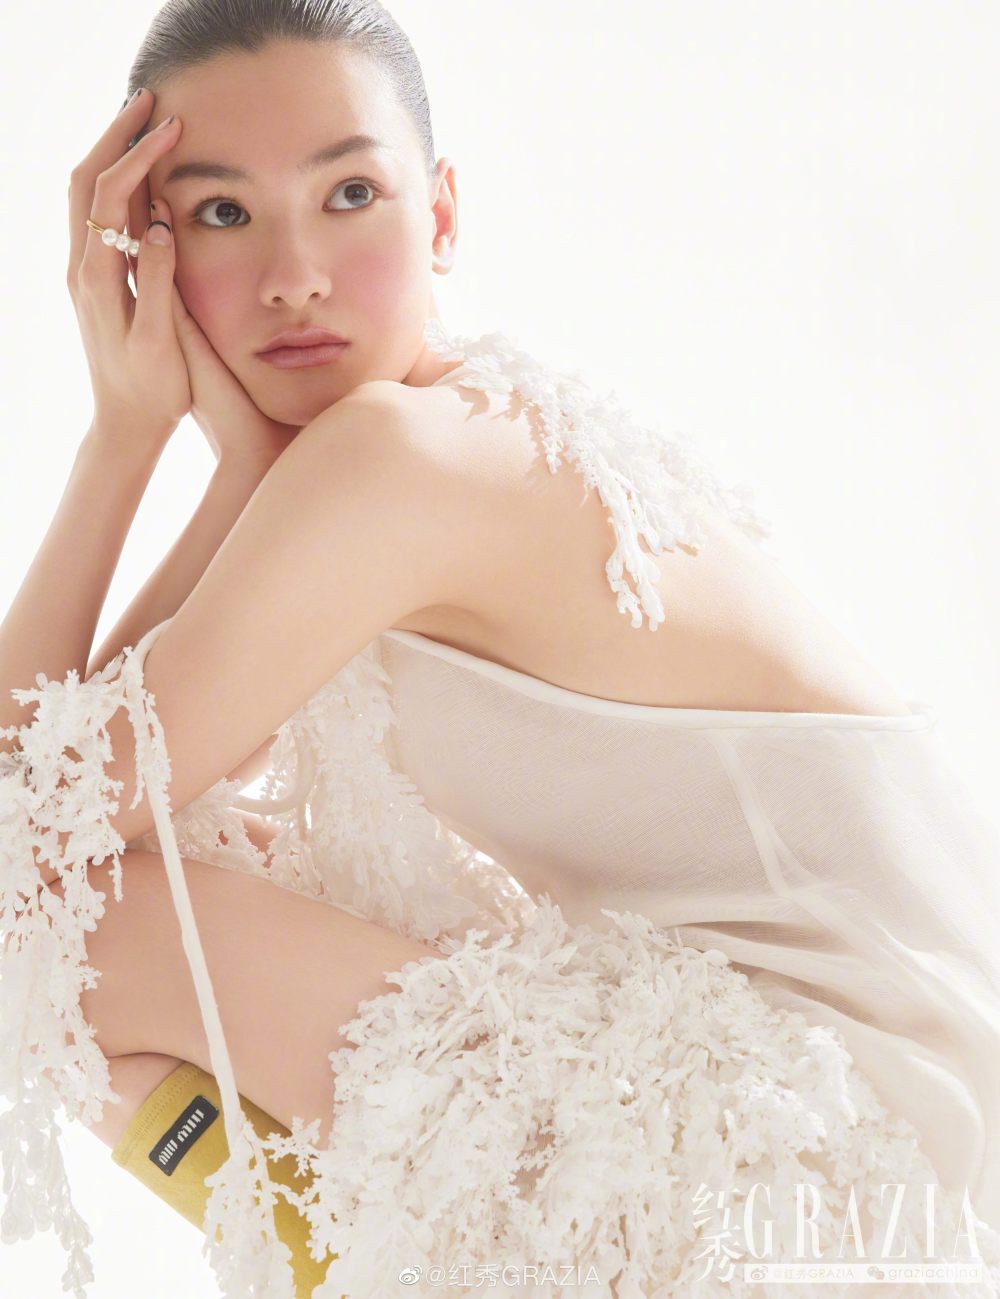 Qiu Tian Sexy and Hottest Photos , Latest Pics